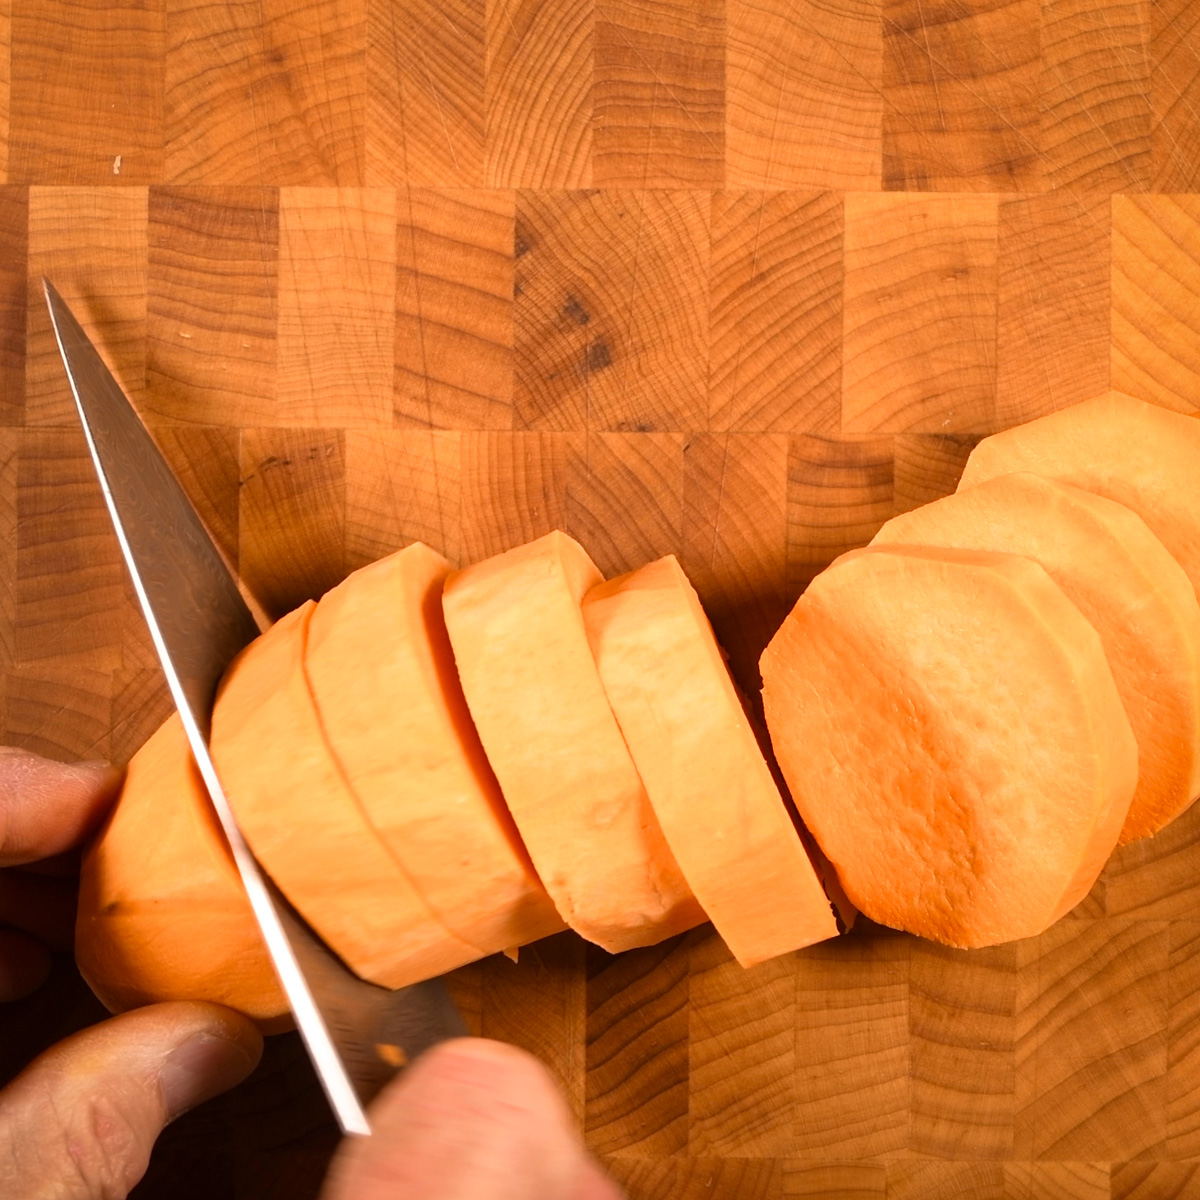 Cut the sweet potatoes into ½" rounds.